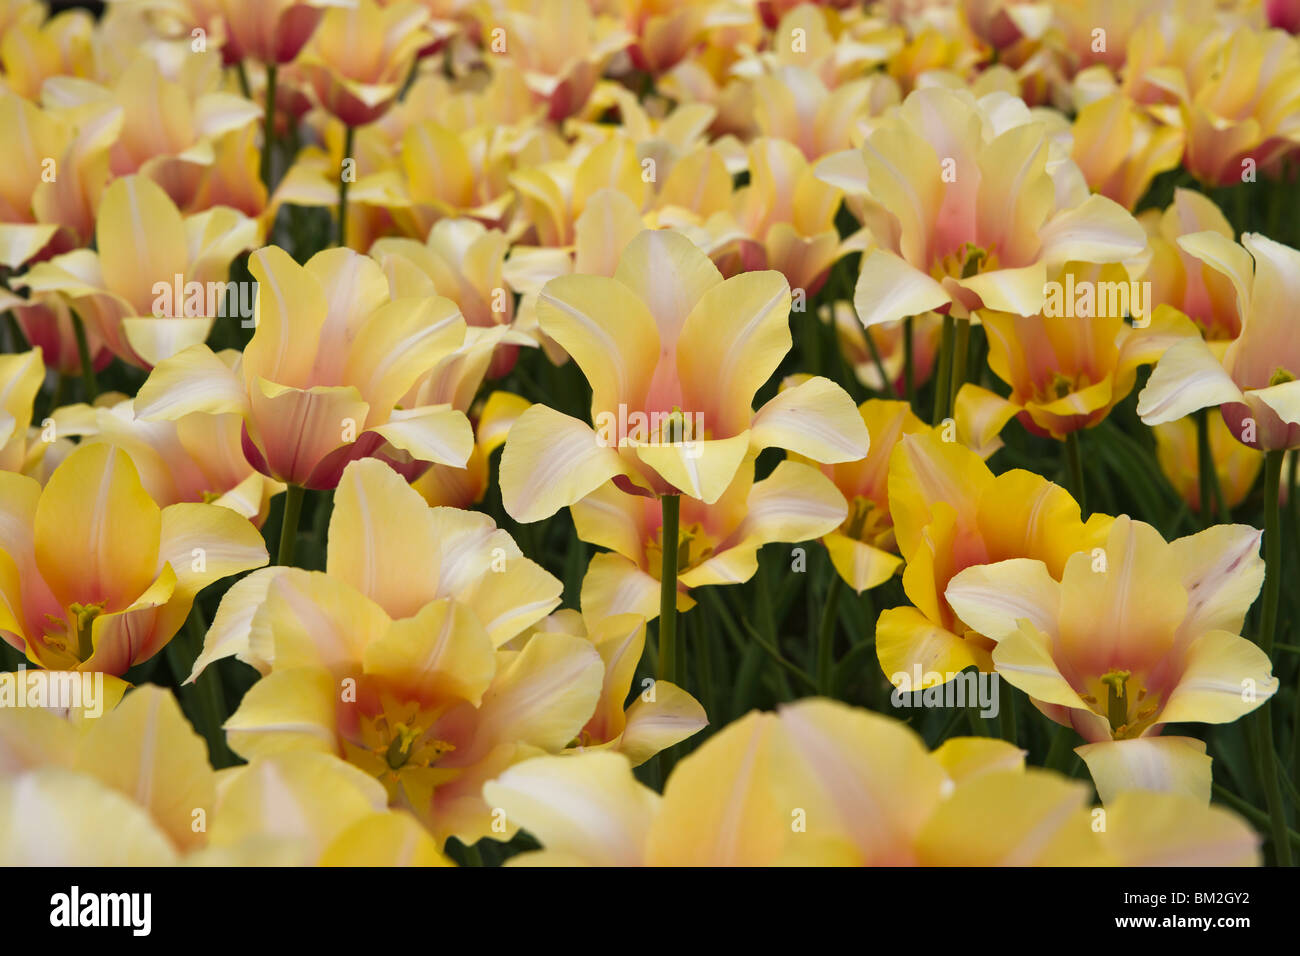 Flowers Tulip Blushing Lady High Resolution Stock Photography And Images Alamy